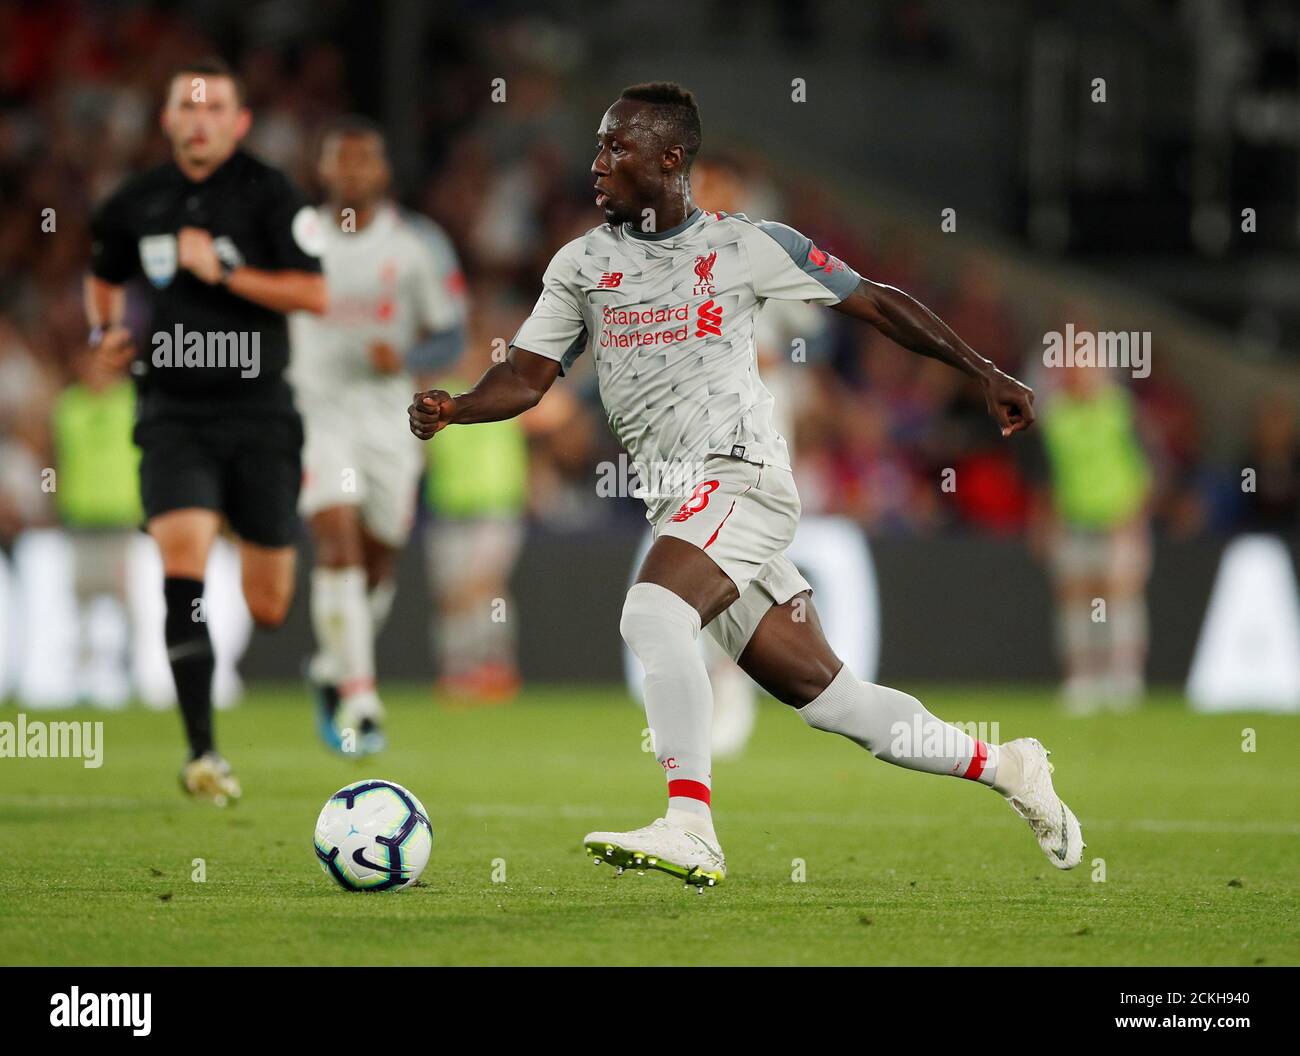 Soccer Football - Premier League - Crystal Palace v Liverpool - Selhurst Park, London, Britain - August 20, 2018 Liverpool's Naby Keita  Action Images via Reuters/John Sibley  EDITORIAL USE ONLY. No use with unauthorized audio, video, data, fixture lists, club/league logos or 'live' services. Online in-match use limited to 75 images, no video emulation. No use in betting, games or single club/league/player publications.  Please contact your account representative for further details. Stock Photo